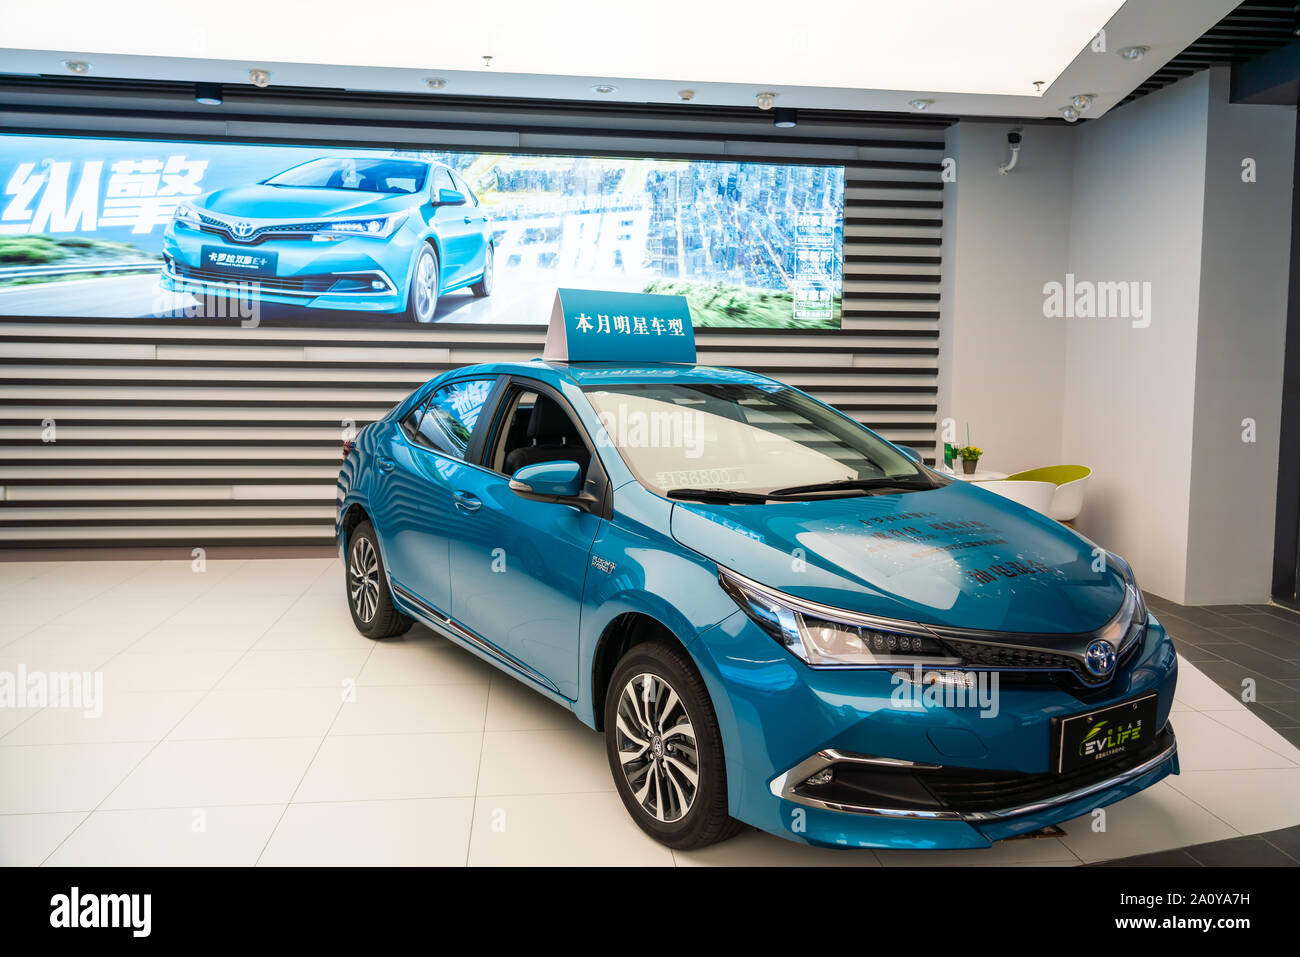 Toyota Levin plug-in hybrid electric vehicle displayed at an electric and hybrid cars retailer in Shanghai. Stock Photo